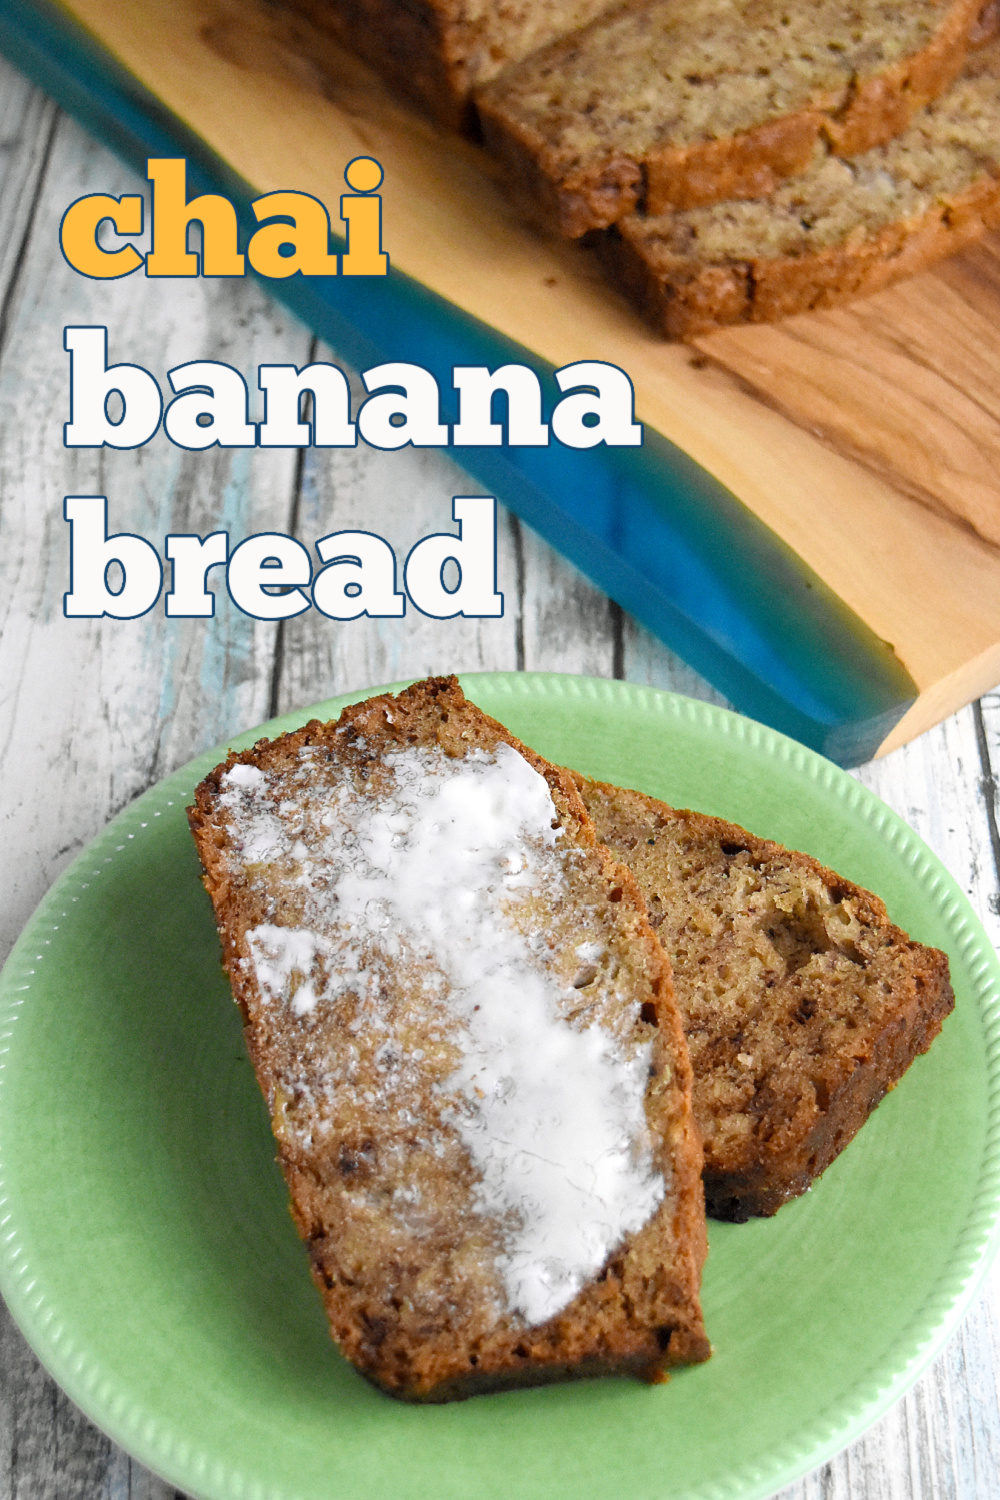 ^Chai Banana Bread^ is moist, delicious, and full of chai spice flavors. It’s buttery, sweet, and irresistible. #OurFamilyTable #quickbread #bananabread #chaispice